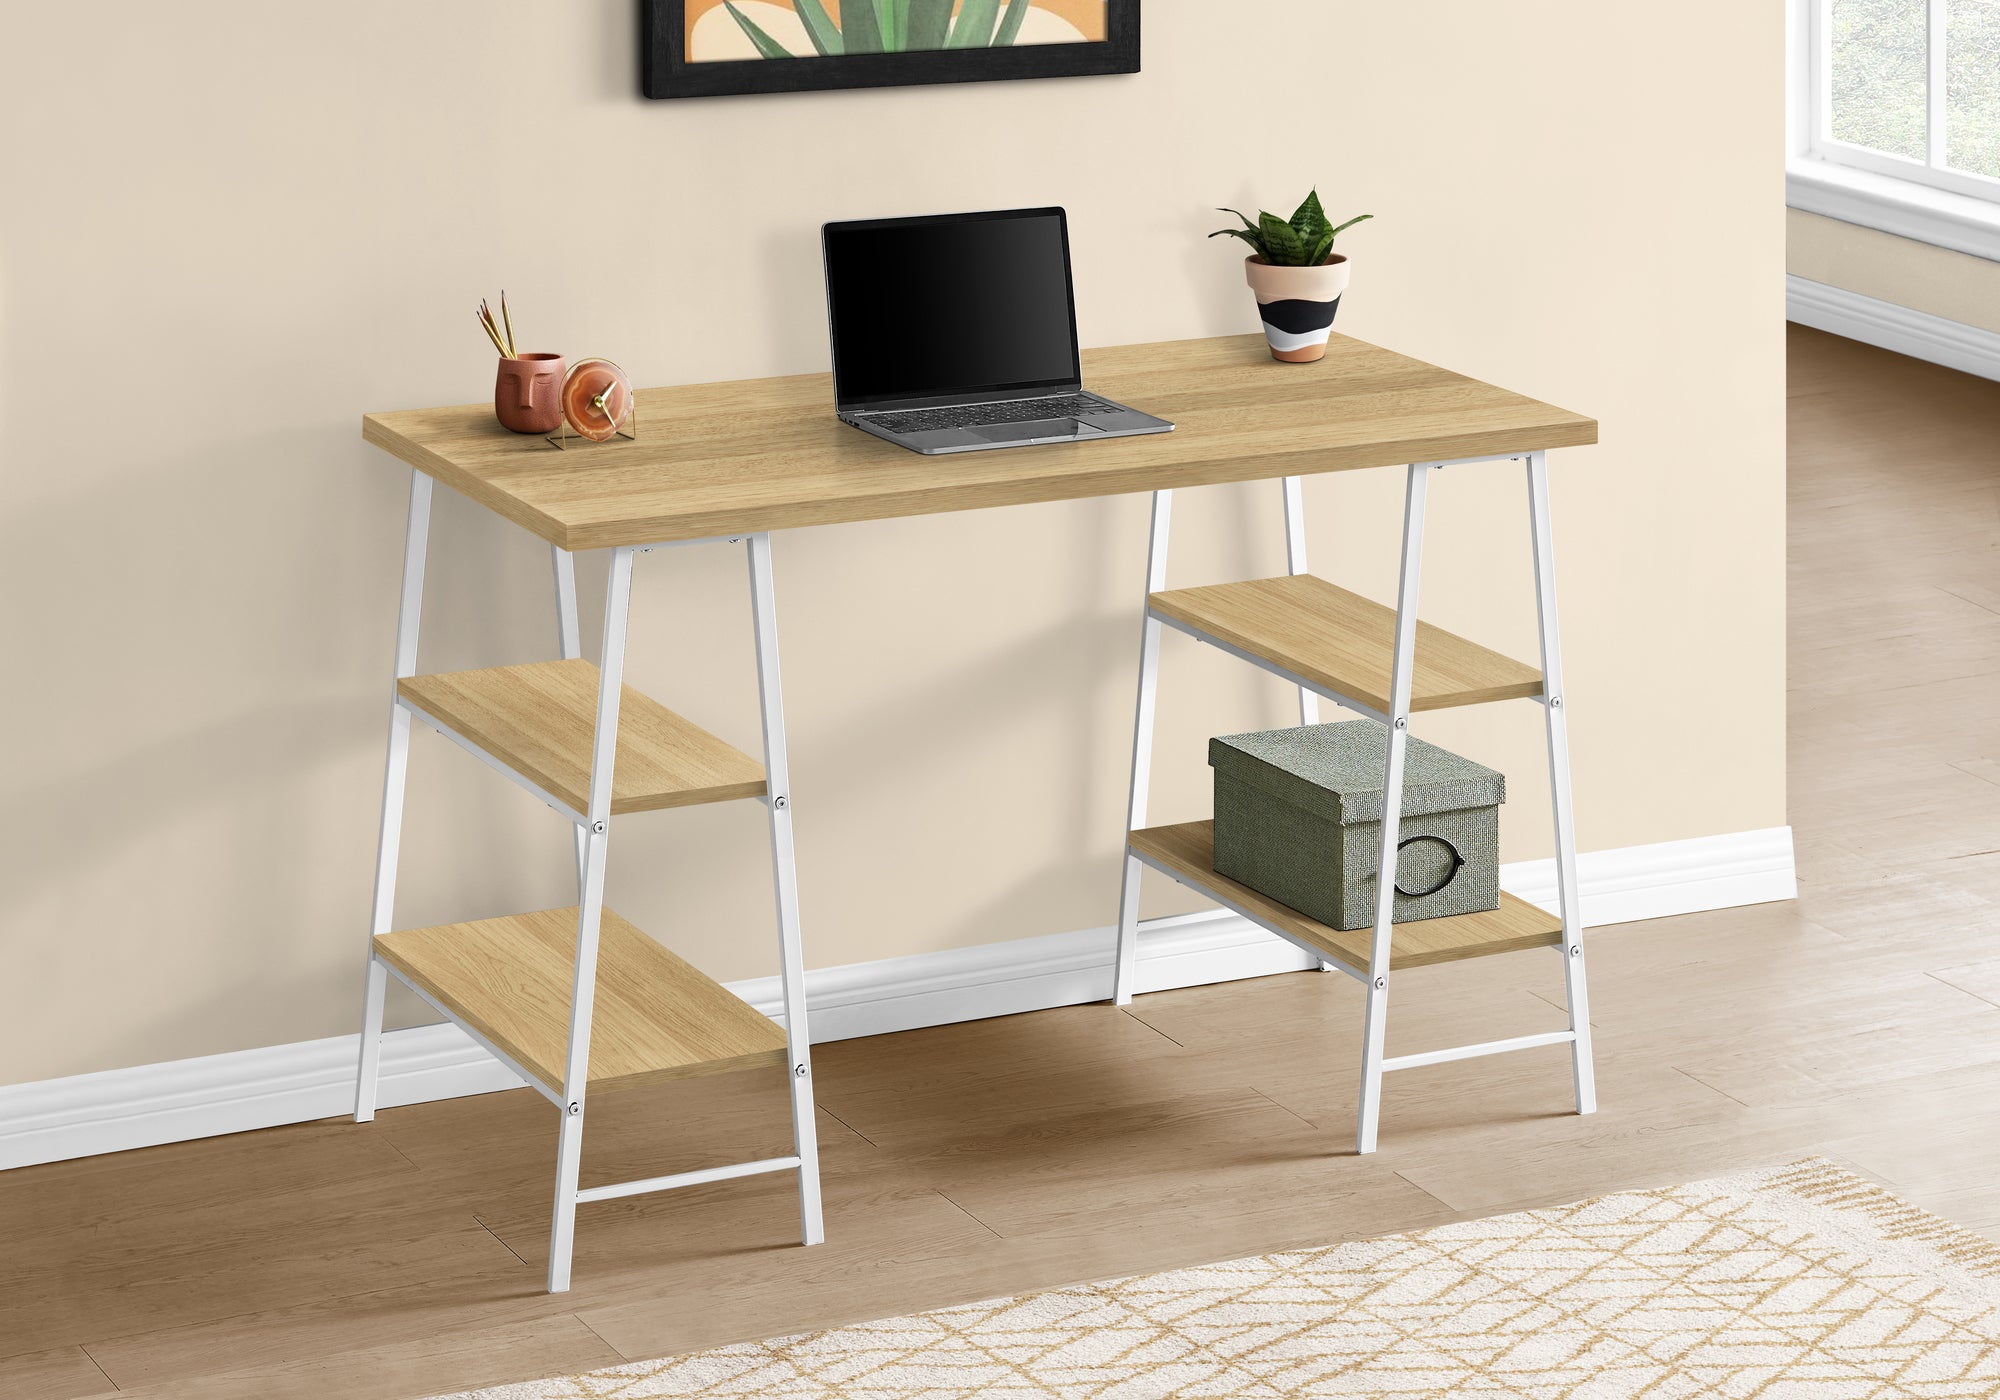 MN-637529    Computer Desk, Home Office, Laptop, Storage Shelves, 48"L, Metal, Laminate, Natural, White, Contemporary, Industrial, Modern